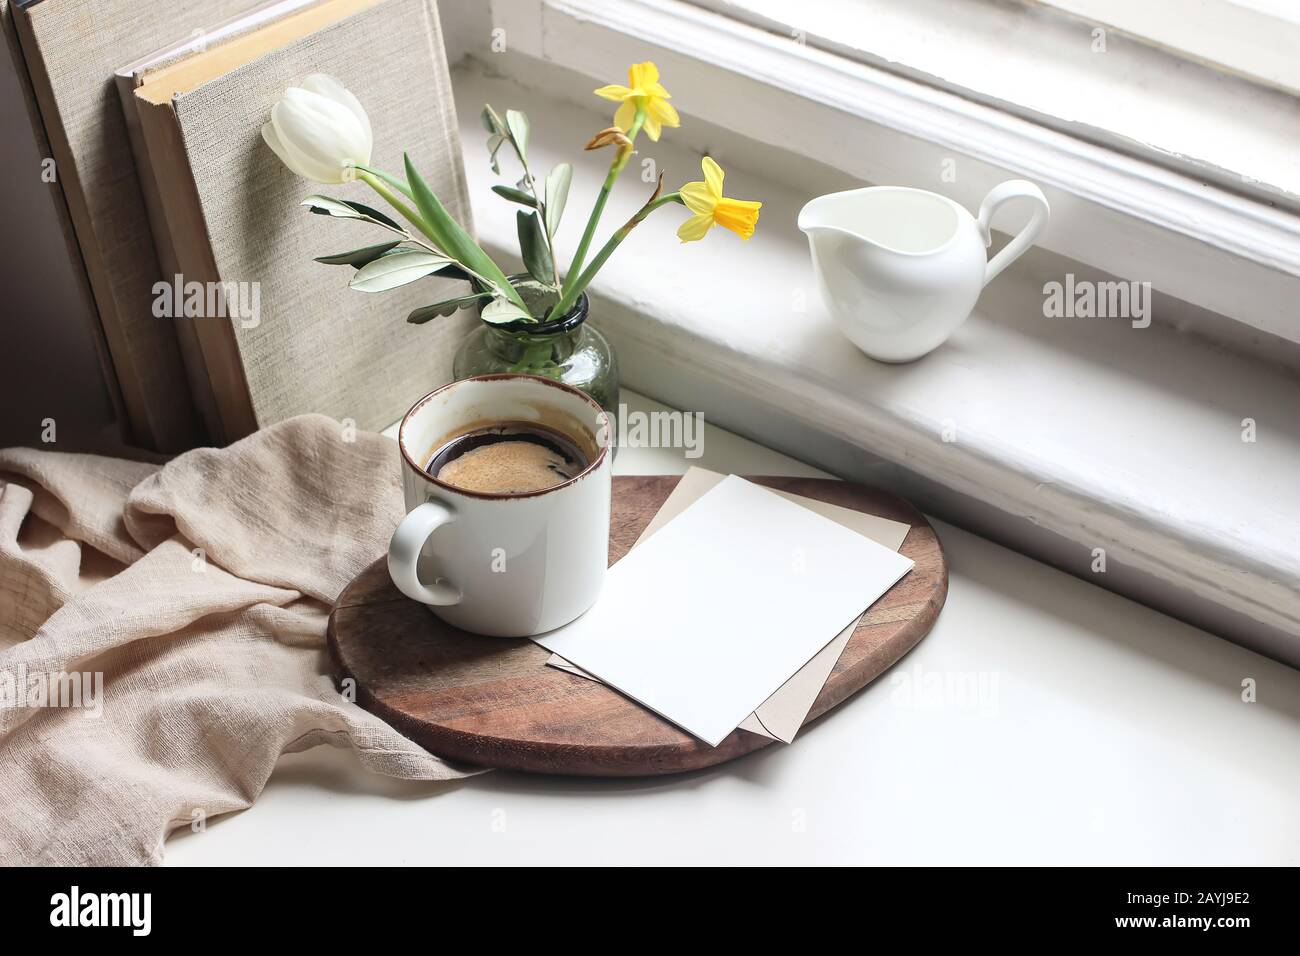 Cozy Easter spring still life. Greeting card mockup scene. Cup of coffee, books, wooden cutting board, milk pitcher and vase of flowers on windowsill. Stock Photo